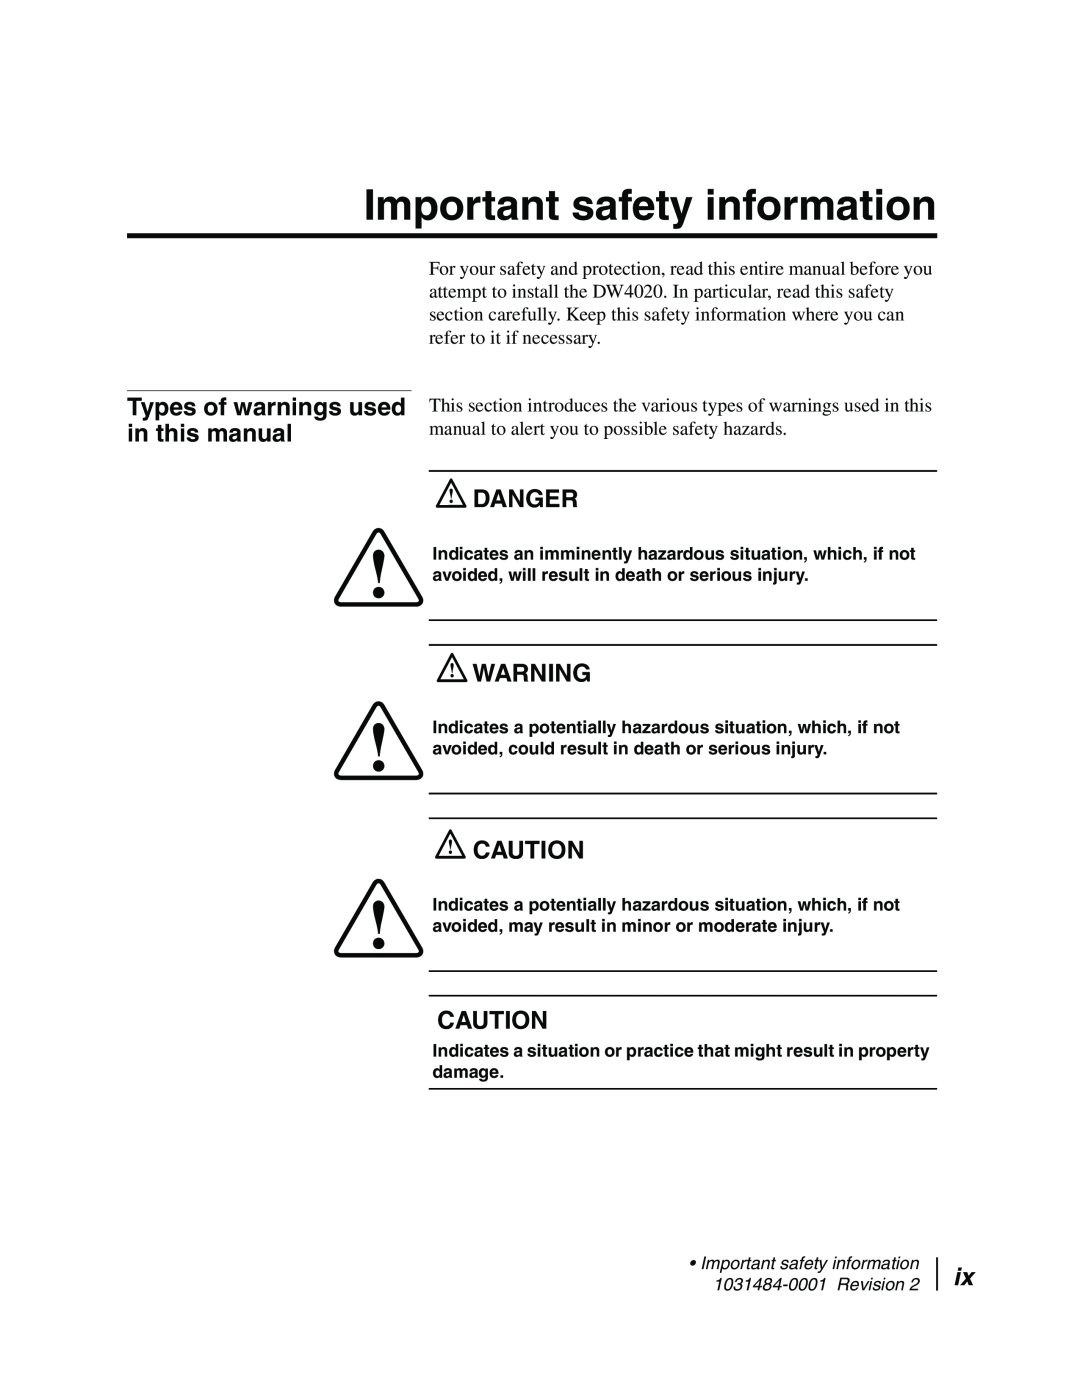 Hughes DW4020 Important safety information, Types of warnings used in this manual, Danger 